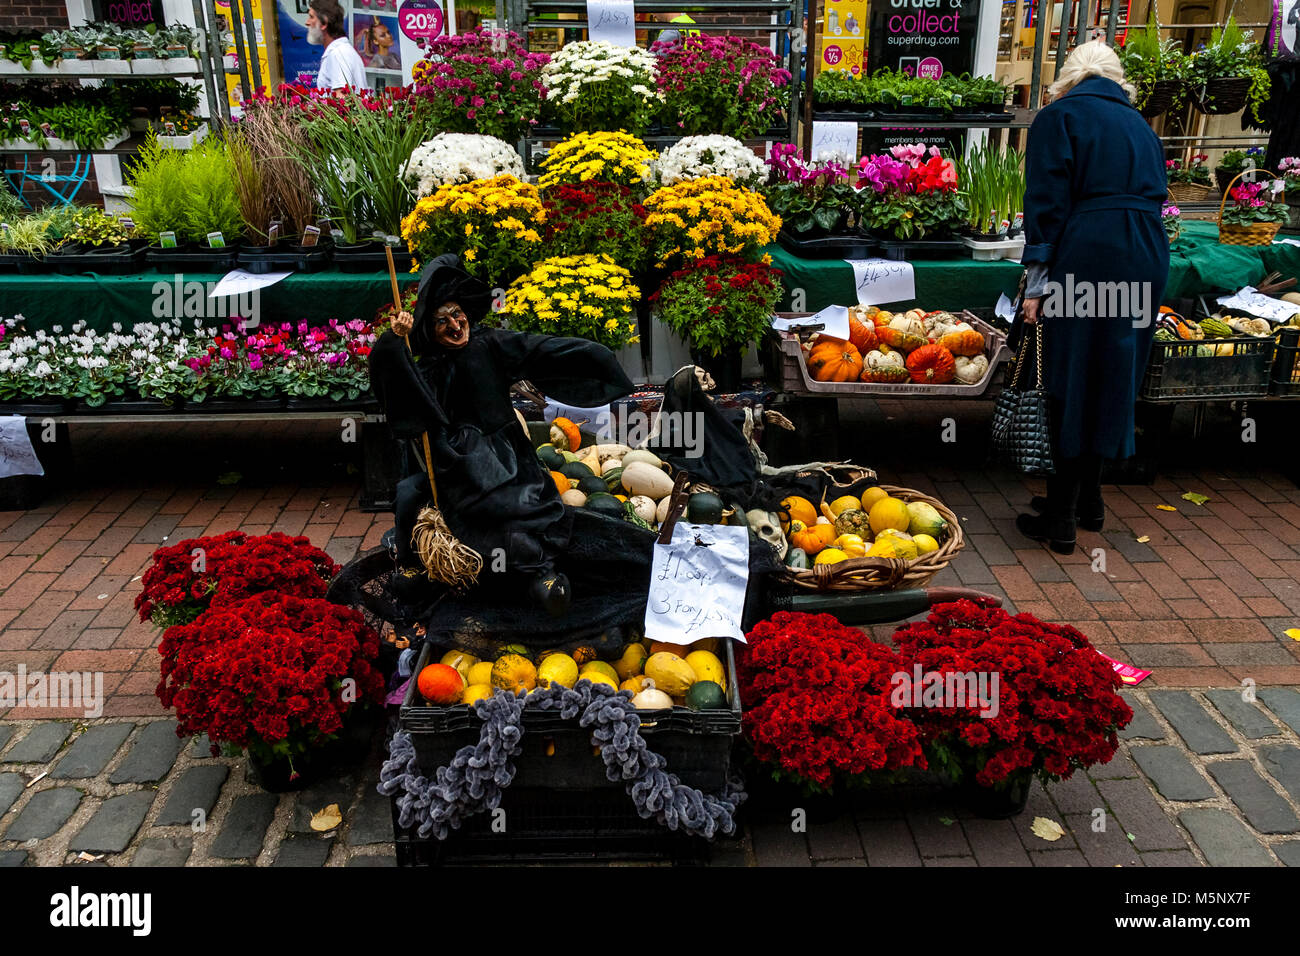 Street Market Stall Selling Flowers, Pumpkins and Squashes At Halloween, High Street, Lewes, Sussex, UK Stock Photo